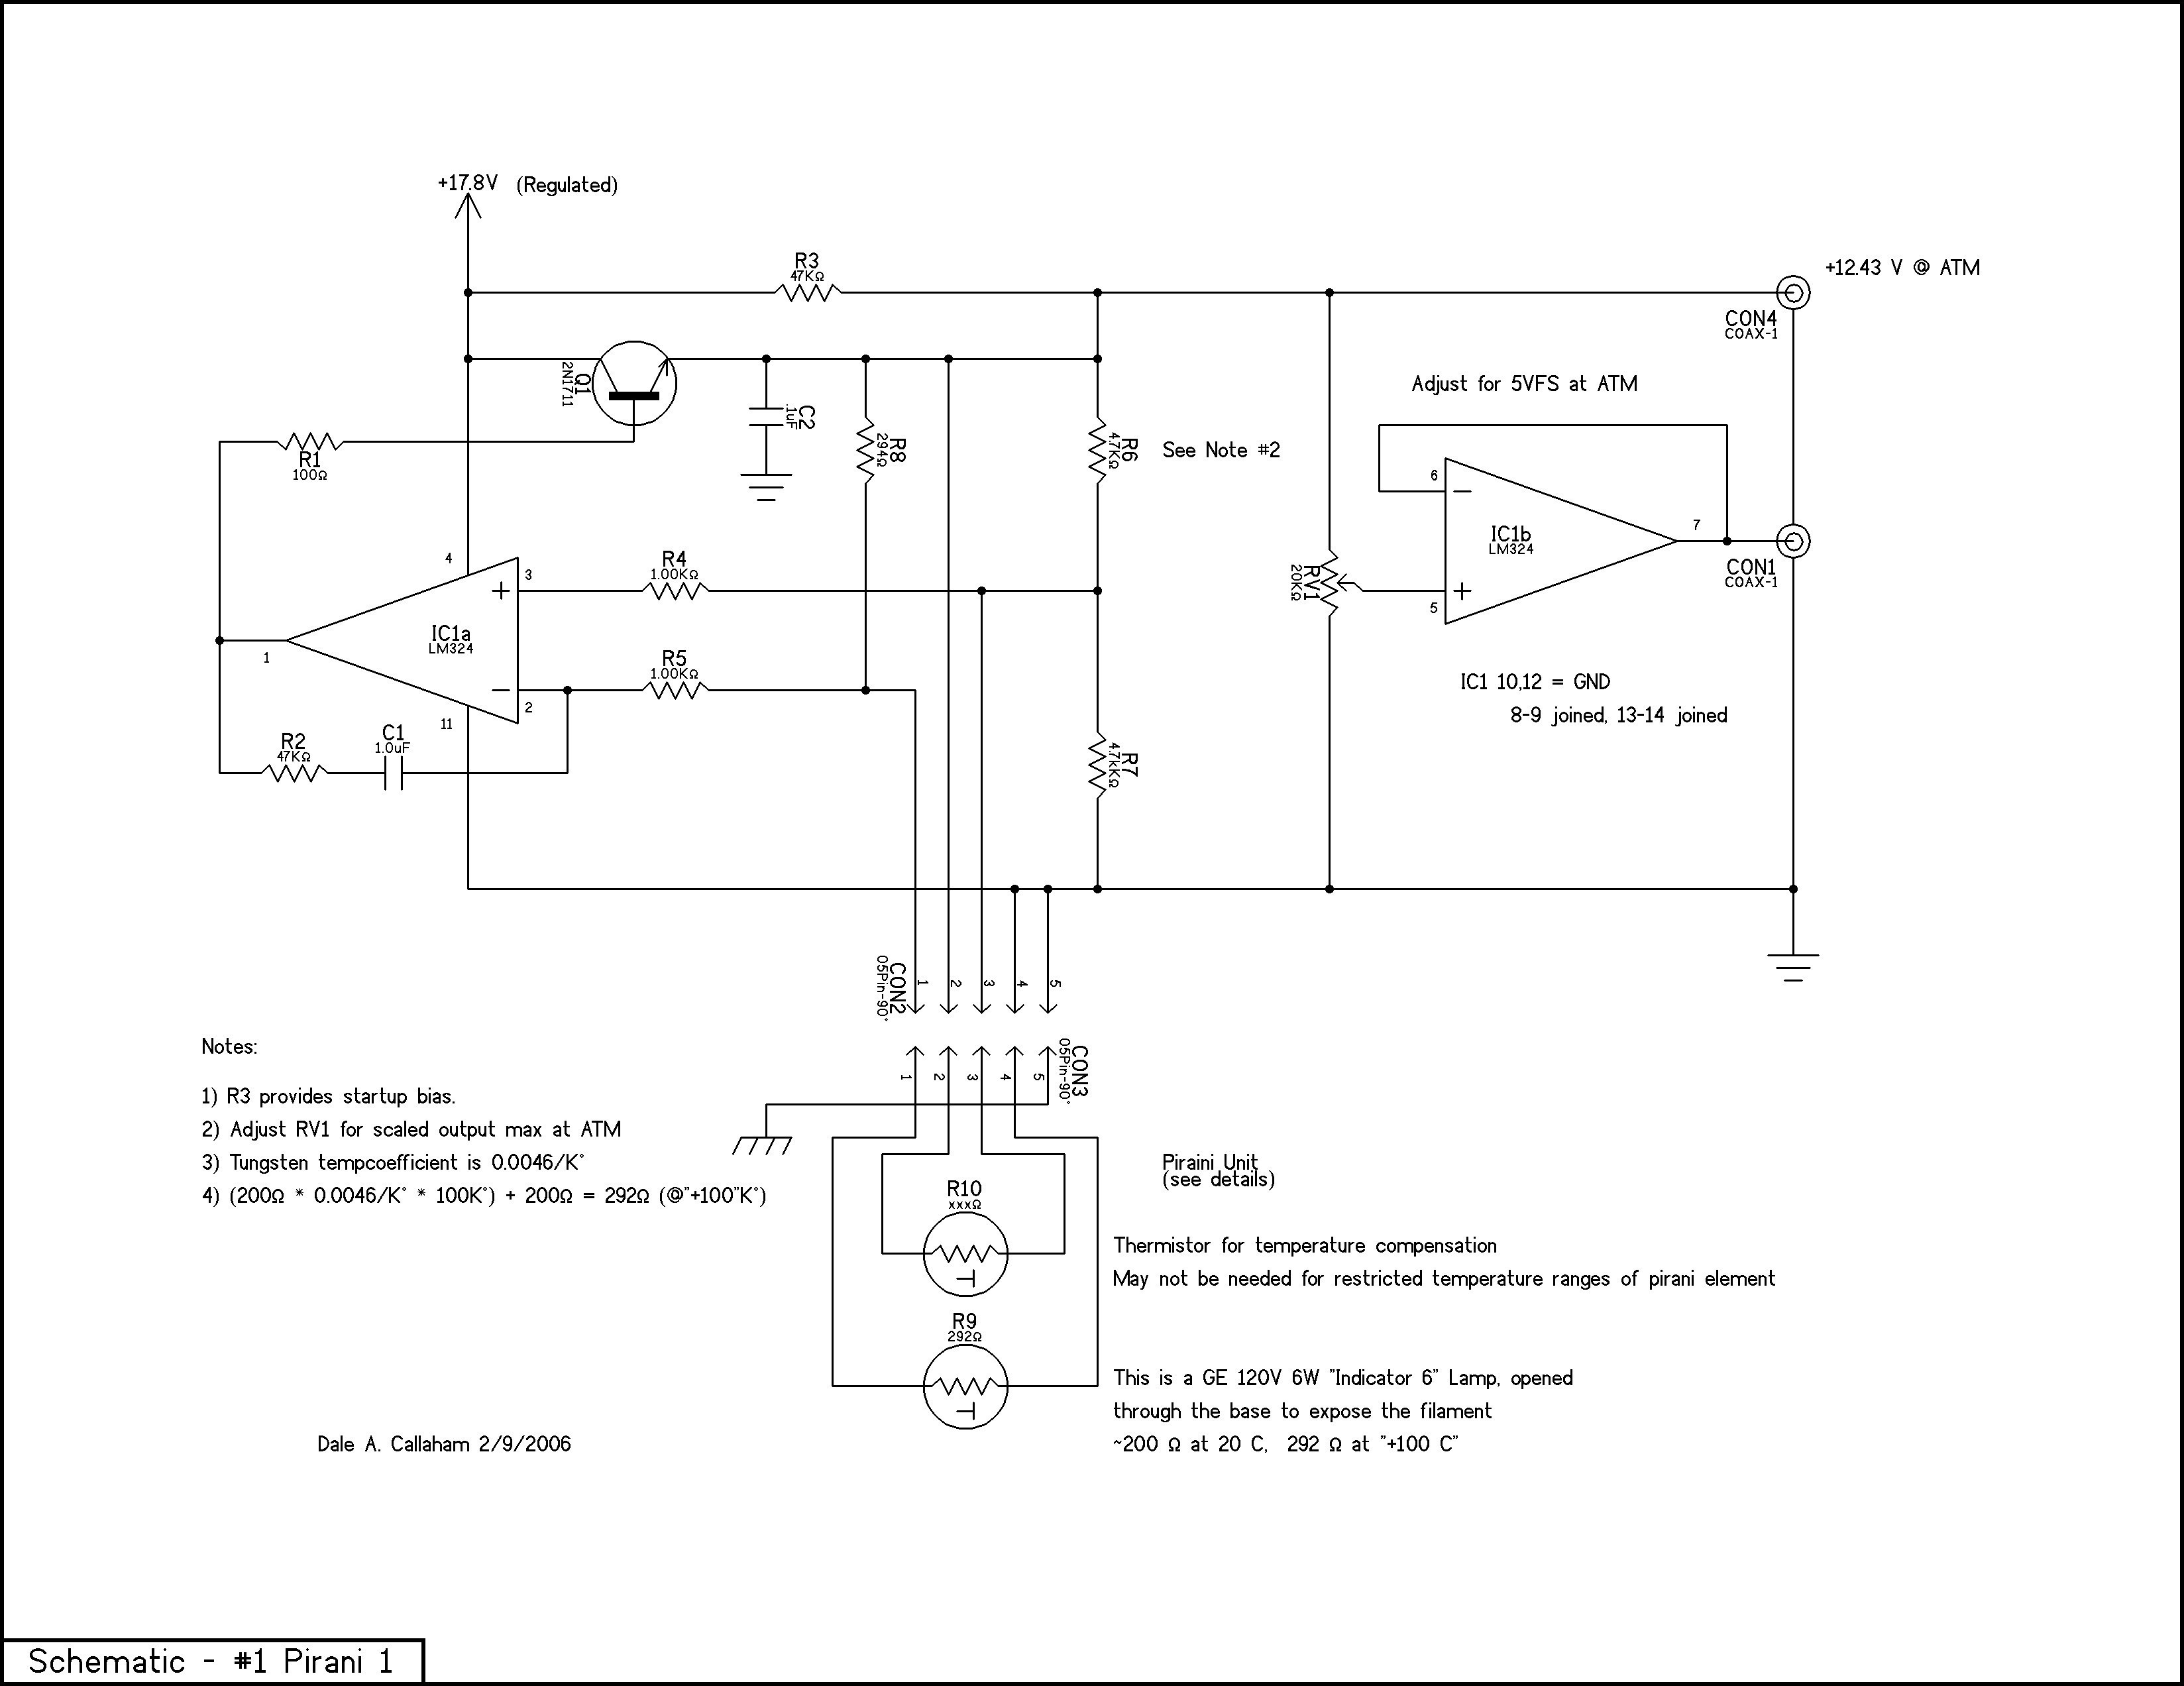 House Lamp Wiring Diagram New House Wiring Diagram Electrical Floor Plan 2004 2010 Bmw X3 E83 3 0d